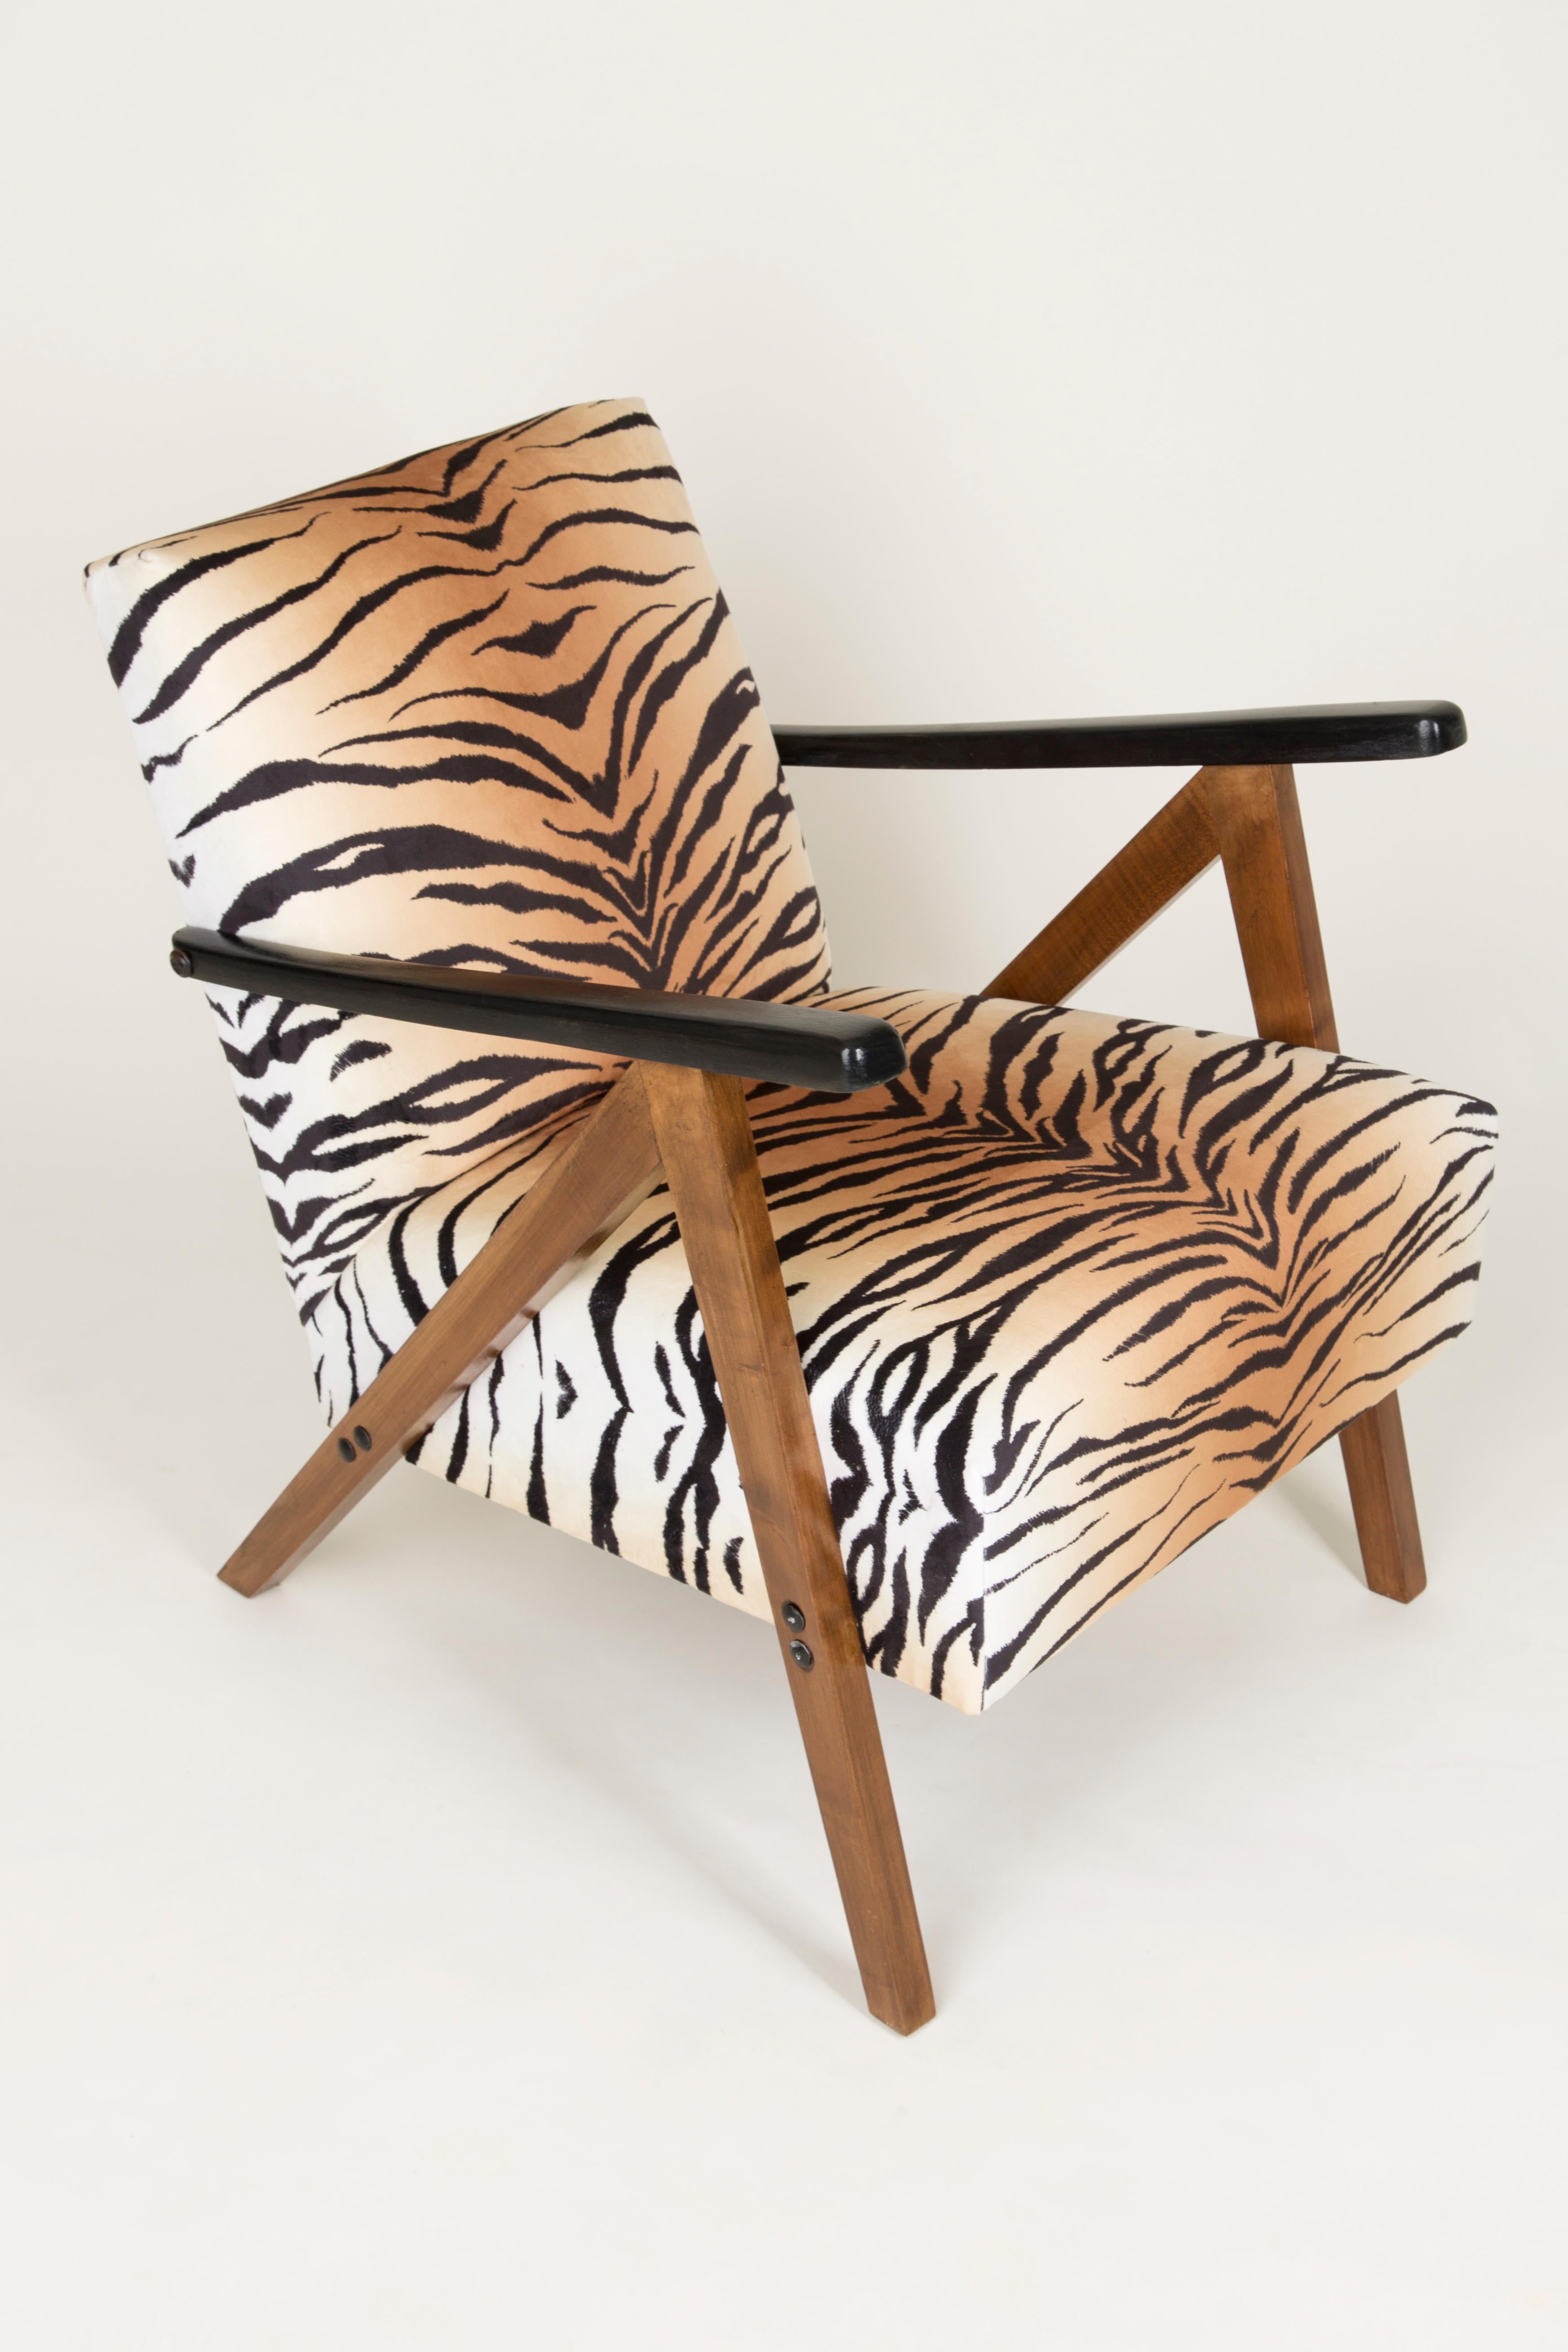 Hand-Crafted Set of Two Mid-Century Modern Tiger Print Armchairs, 1960s, Germany For Sale